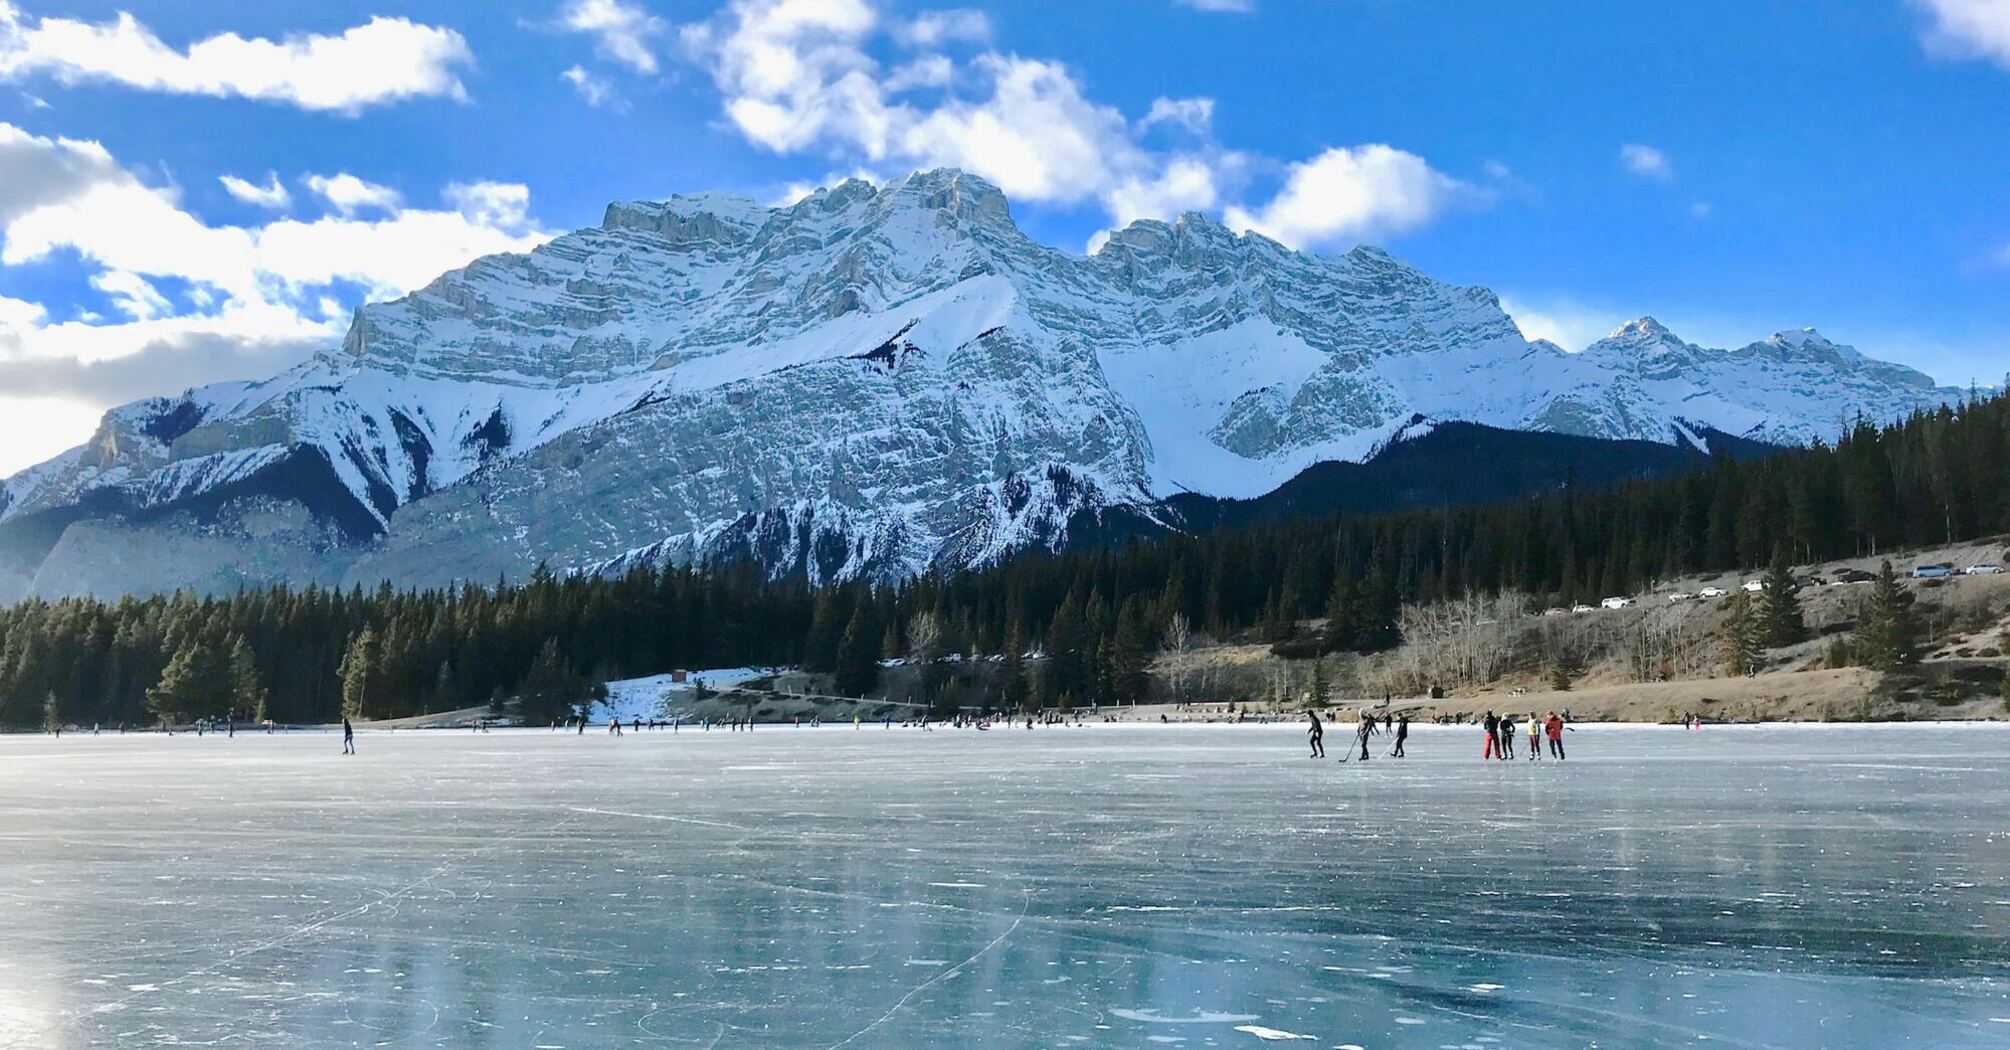 Skating on an ice covered mountain lake